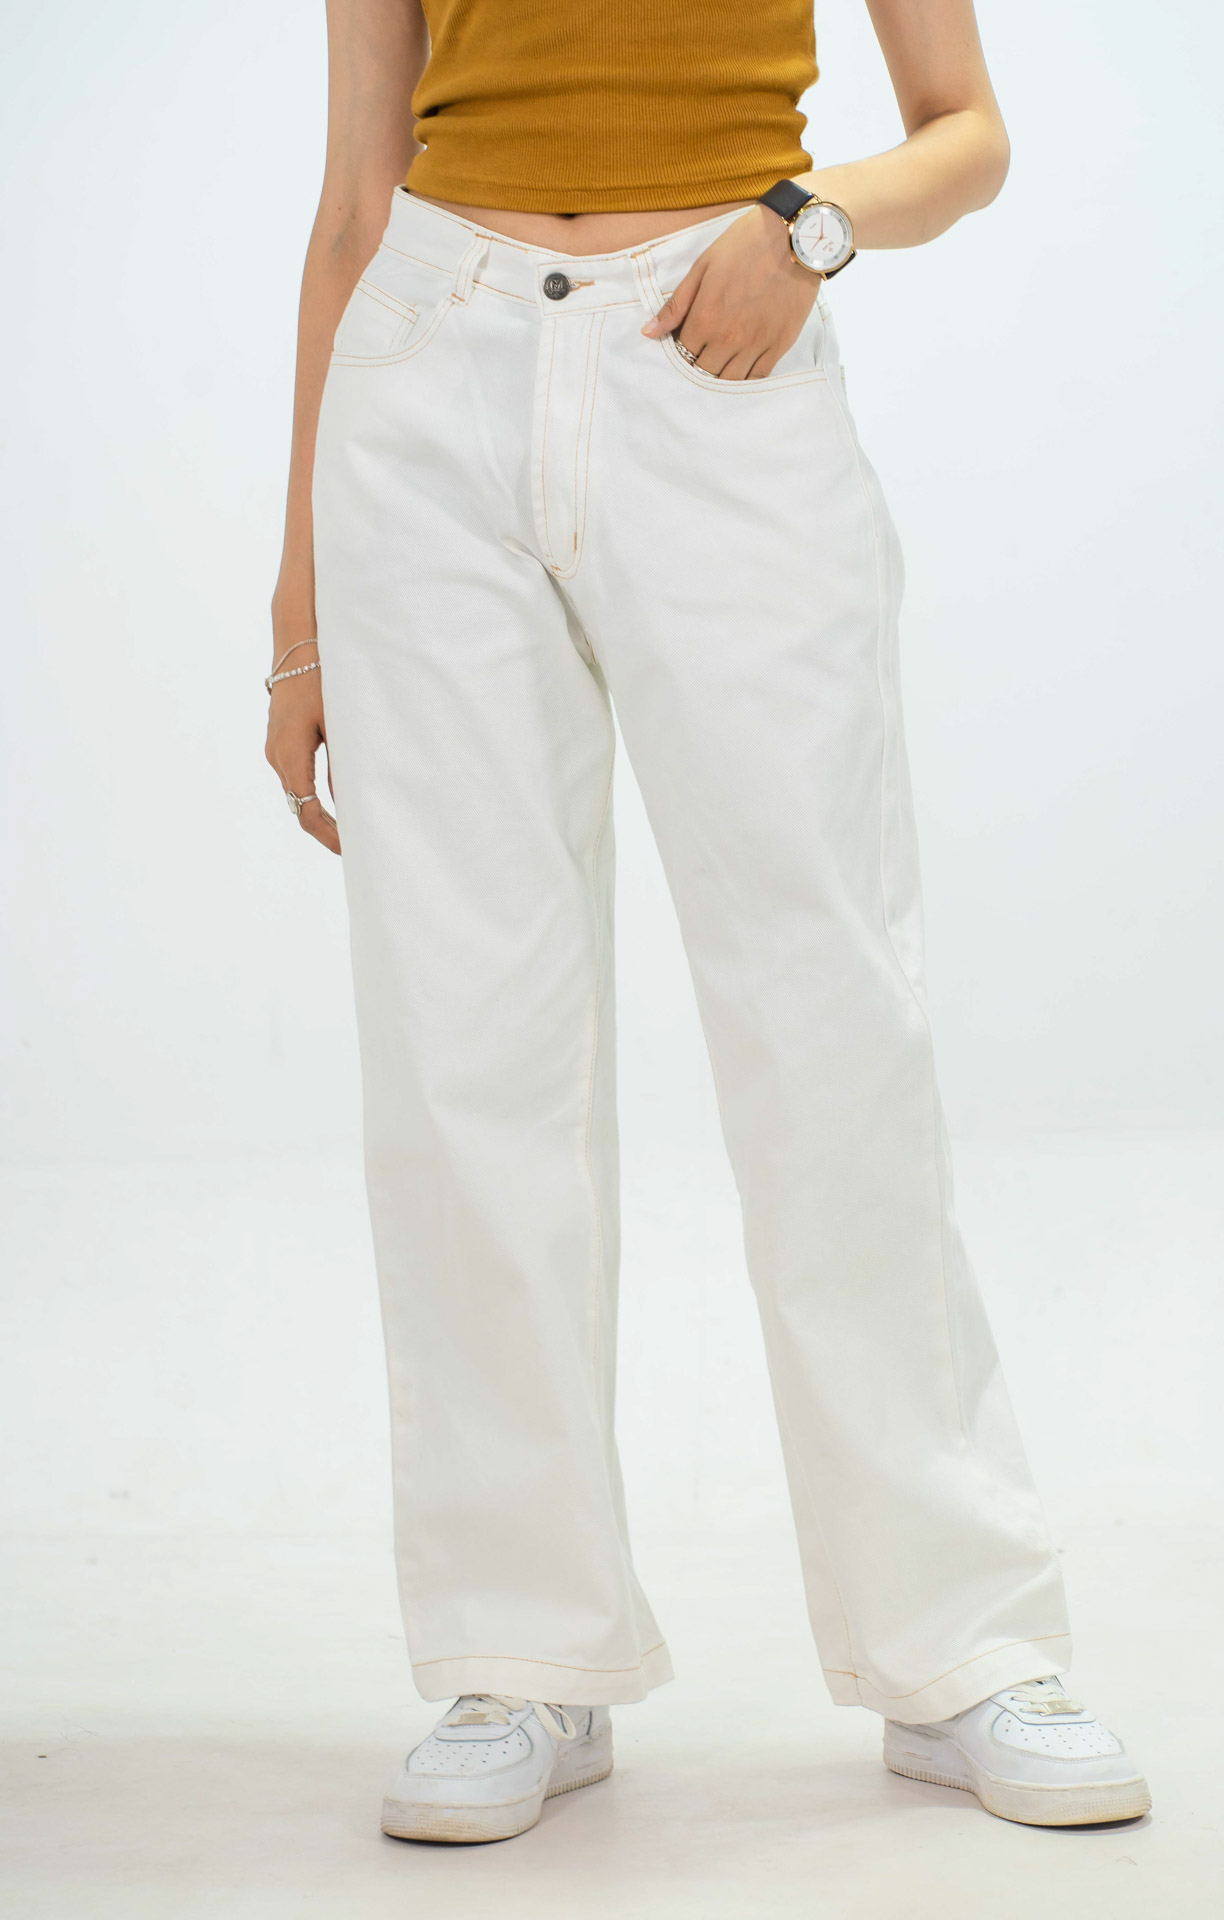 High Waisted Contrast Stitch White Jeans